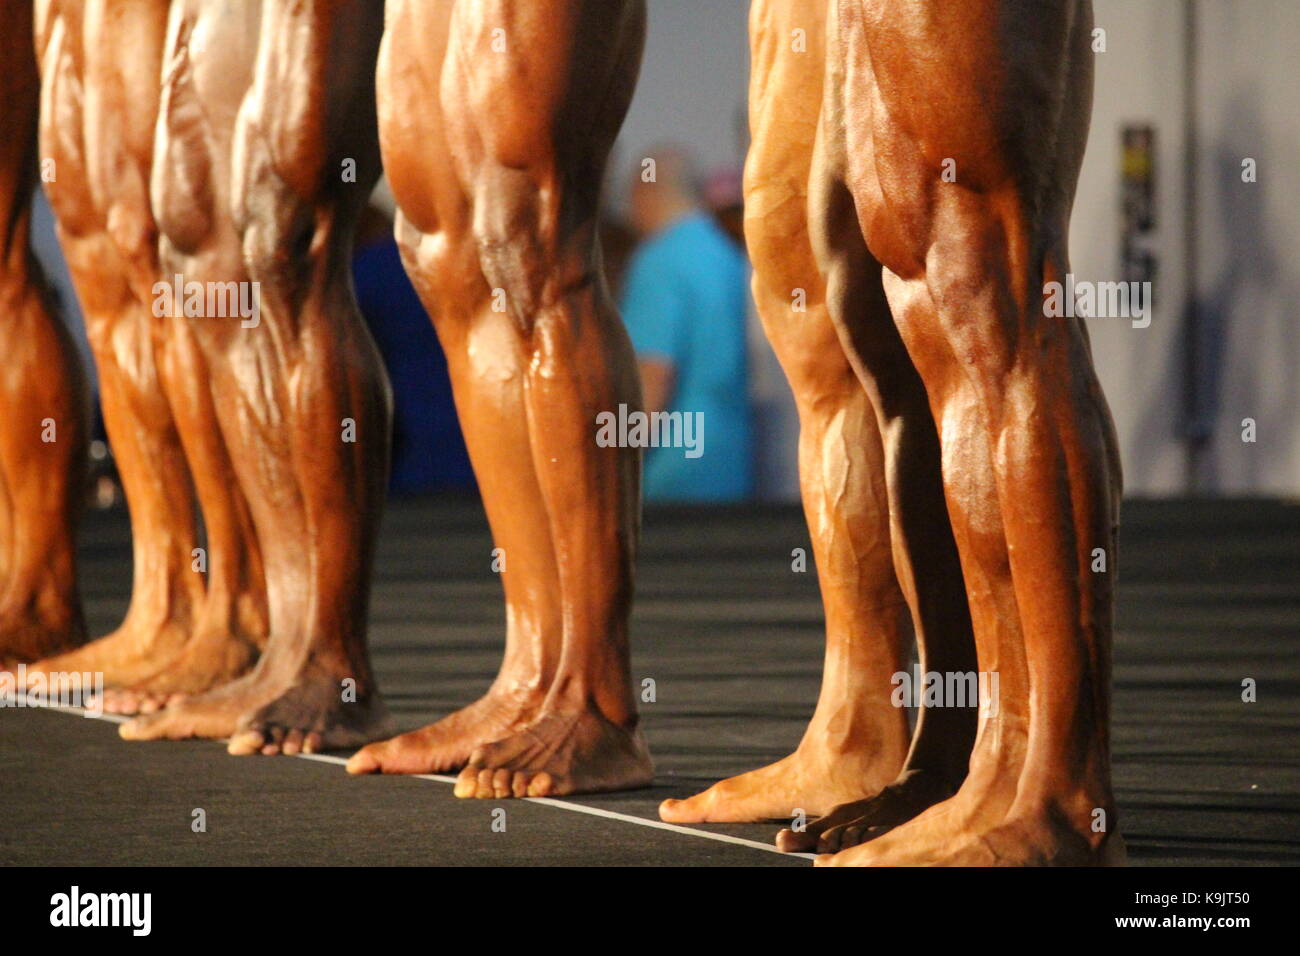 Barcelona, Spain - September 22, 2017: Legs details of bodybuilders  participating at the 7th edition of “Arnold Classic Europe” in Barcelona,  one of the biggest multi-sports fairs with over 1500 athletes from